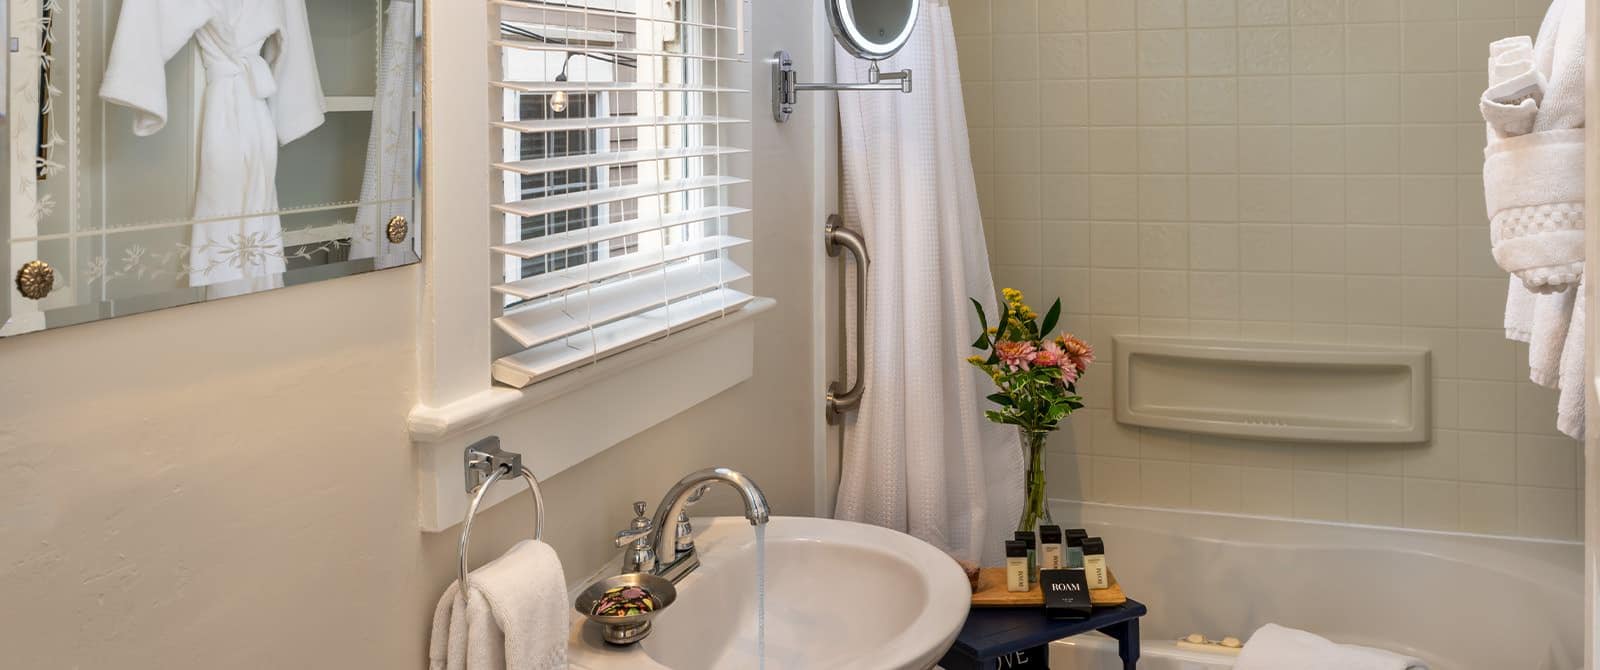 Bathroom with white walls, white sink, and white tub